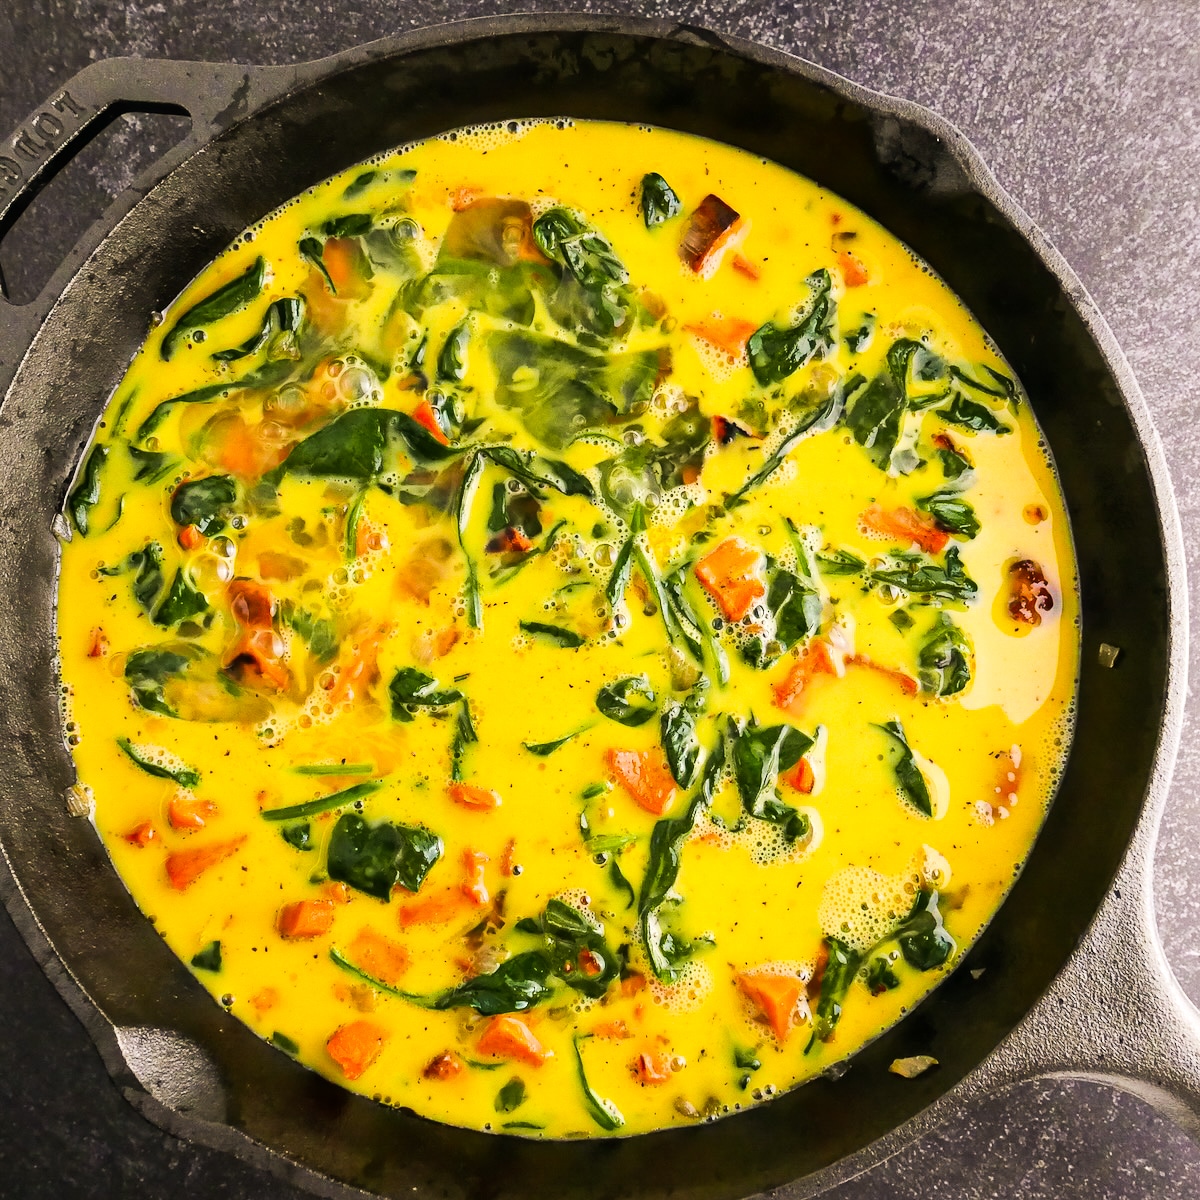 Whisked egg mixture poured into cooked veggie mixture in skillet.